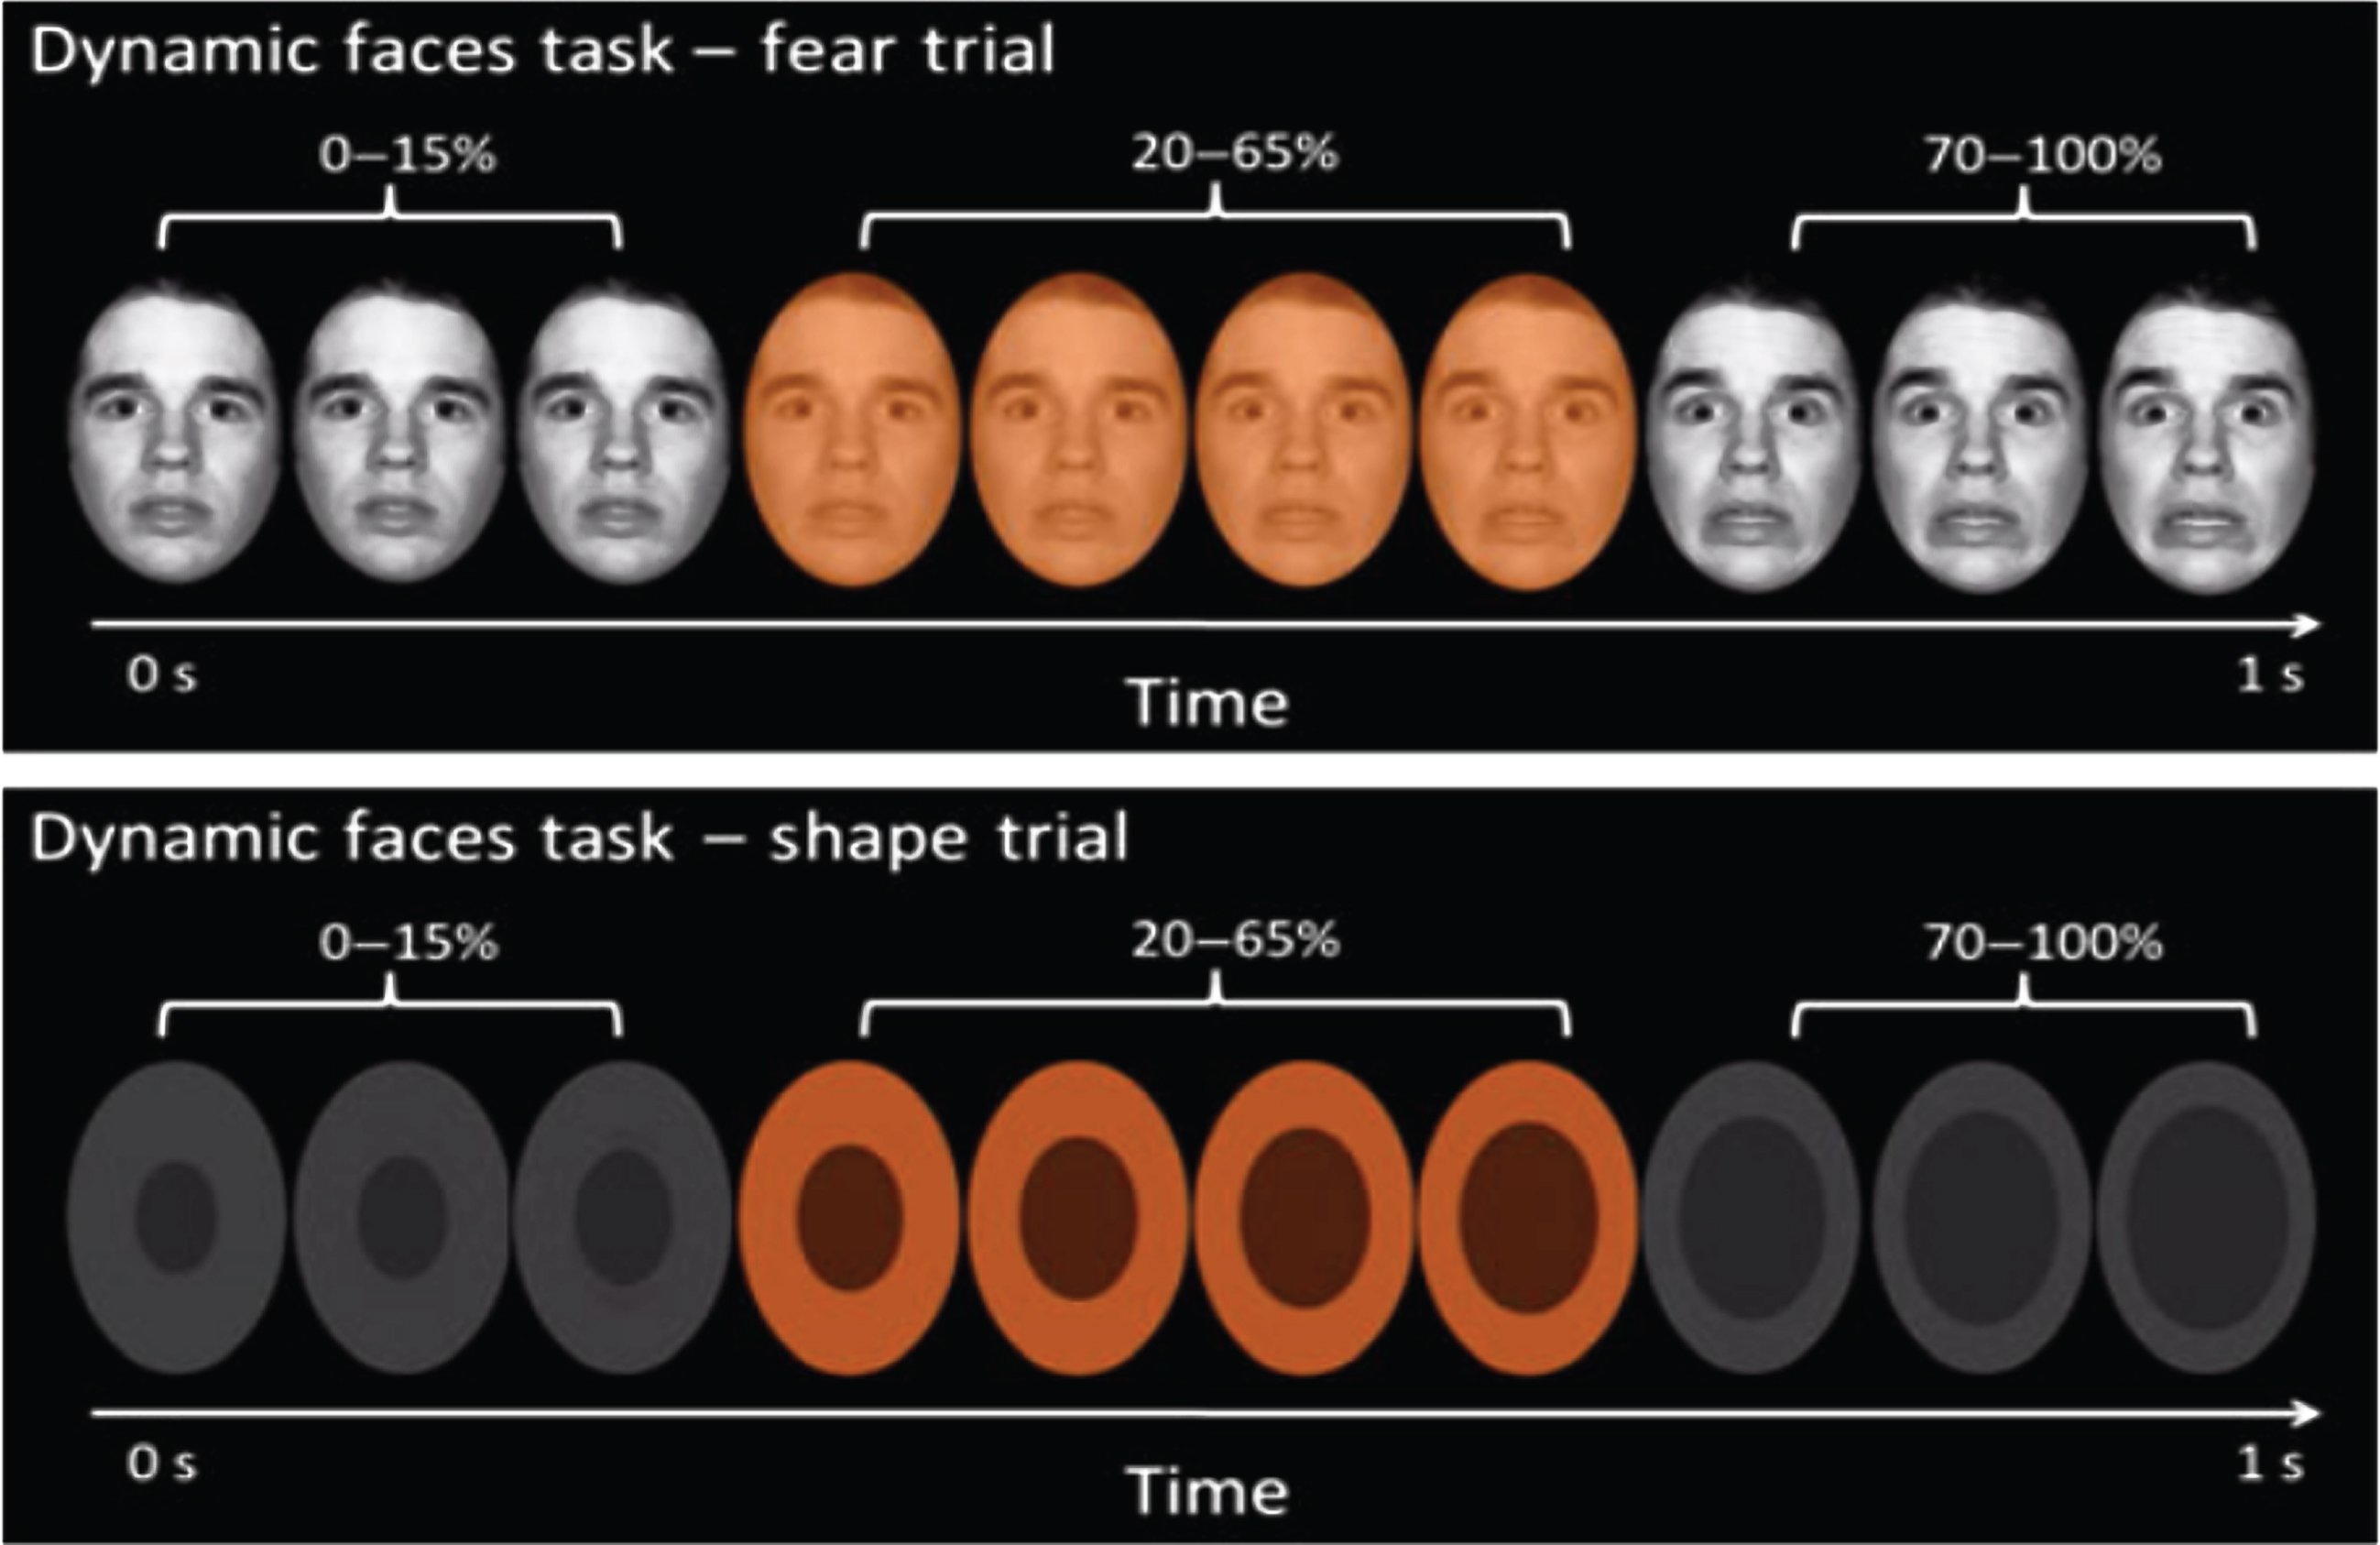 The top panel presents a fear trial of the dynamic emotional faces task. Over a one-sec duration, the participants viewed a movie of a face that changed in 5% increments from neutral (0% emotion) to a happy, sad, angry, or fearful (100% emotion) face. The bottom panel represents the changing shape condition, which was used as the baseline condition. In both cases, participants were asked to identify the color flash presented in the middle of the dynamic change.